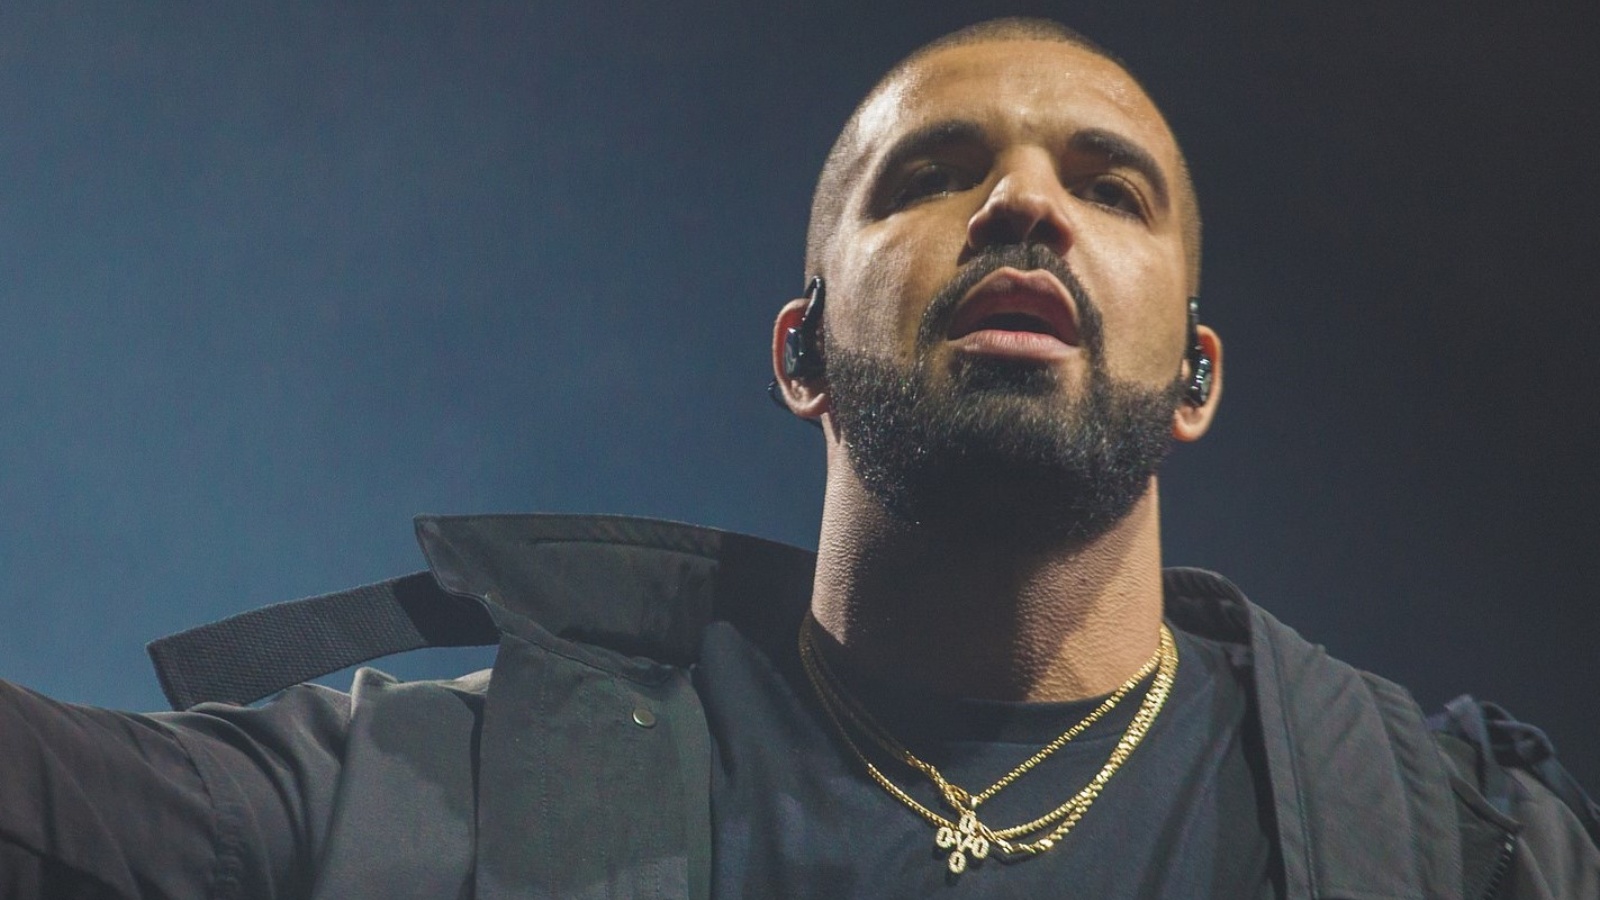 Drake’s alleged leaked video sends internet into thirst frenzy